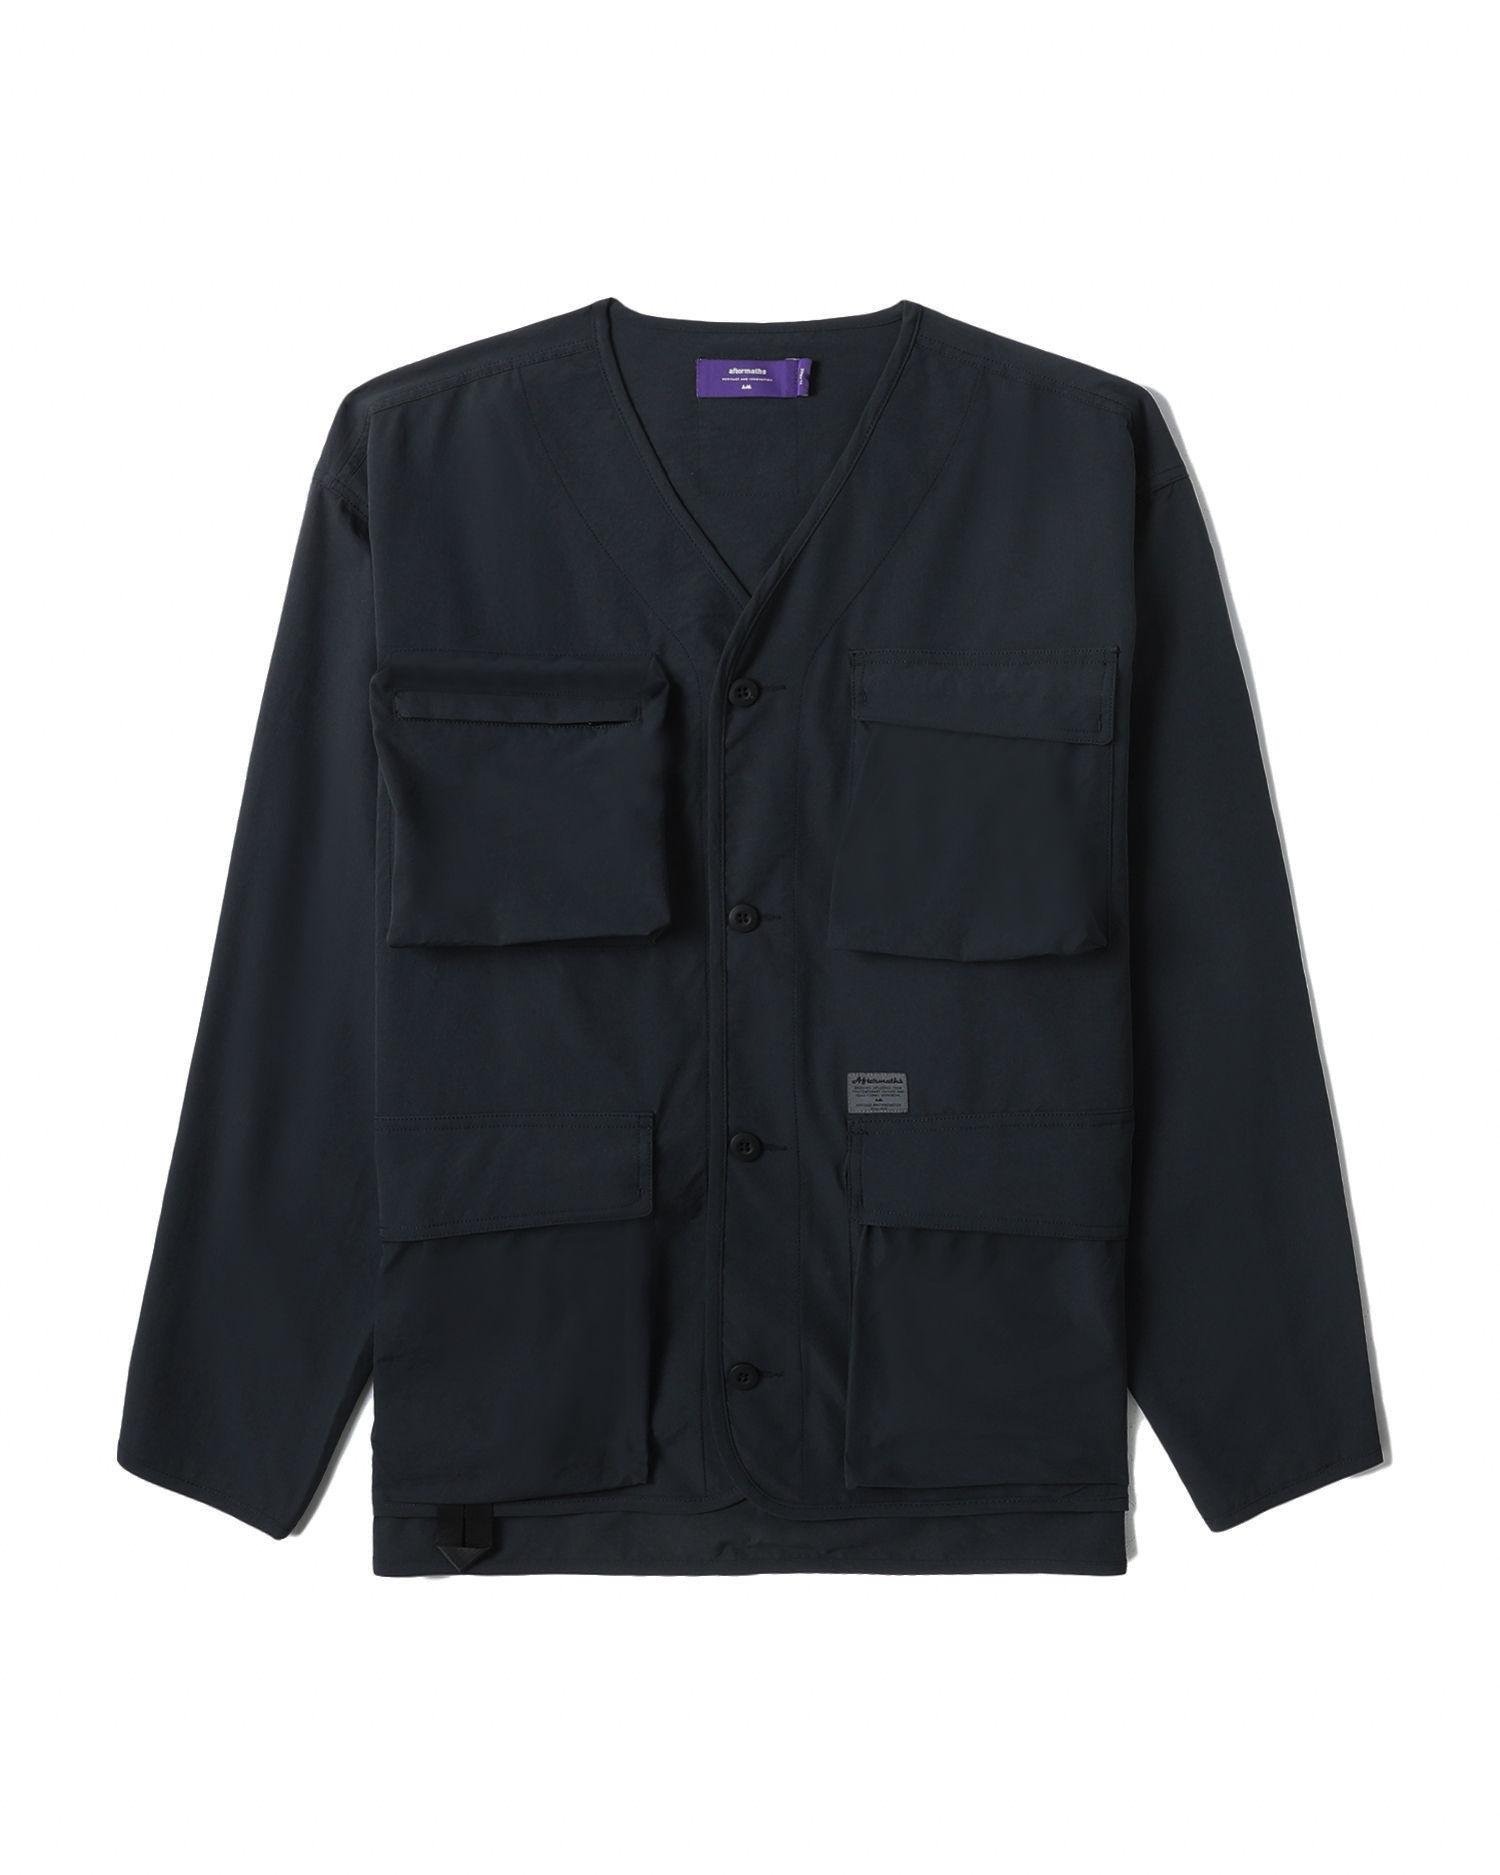 Utility long sleeve shirt by AFTERMATHS